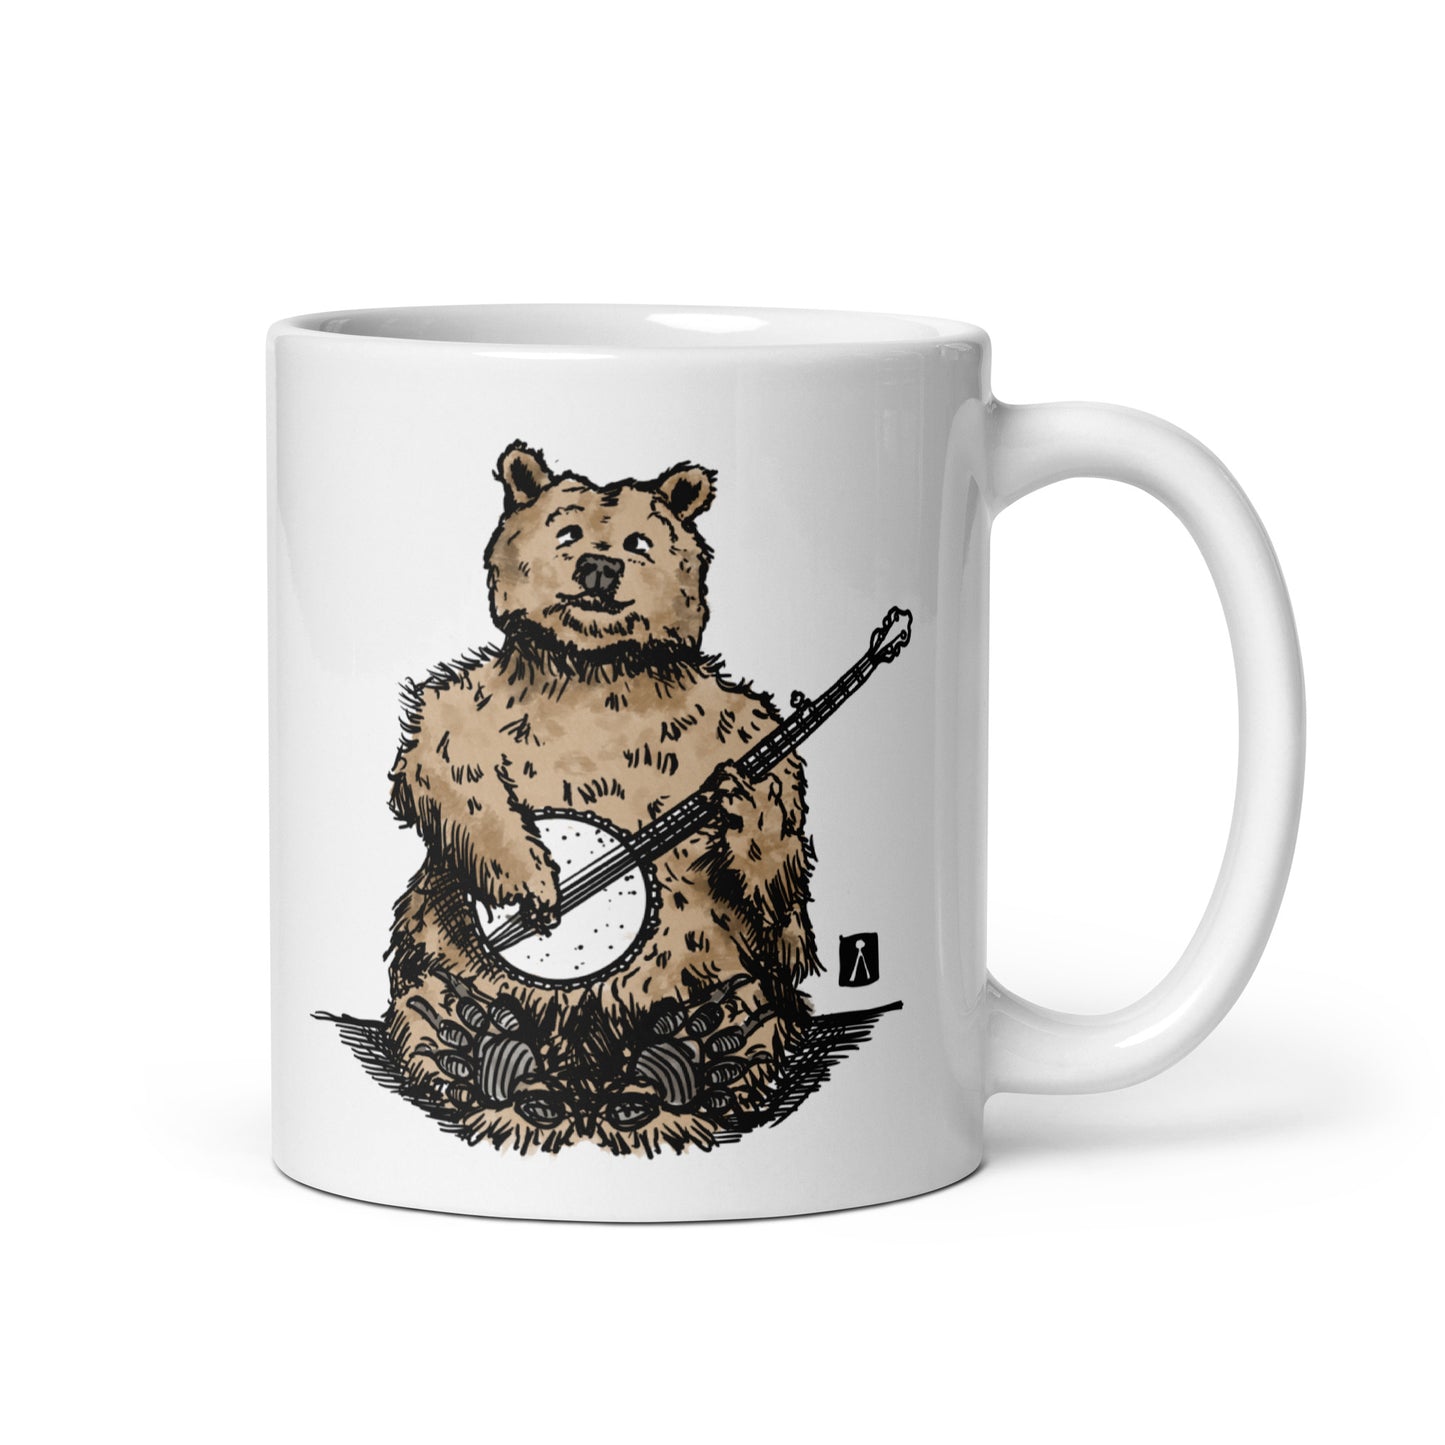 BellavanceInk: White Coffee Mug With A Grizzly Bear Playing The Banjo Pen & Ink Illustration